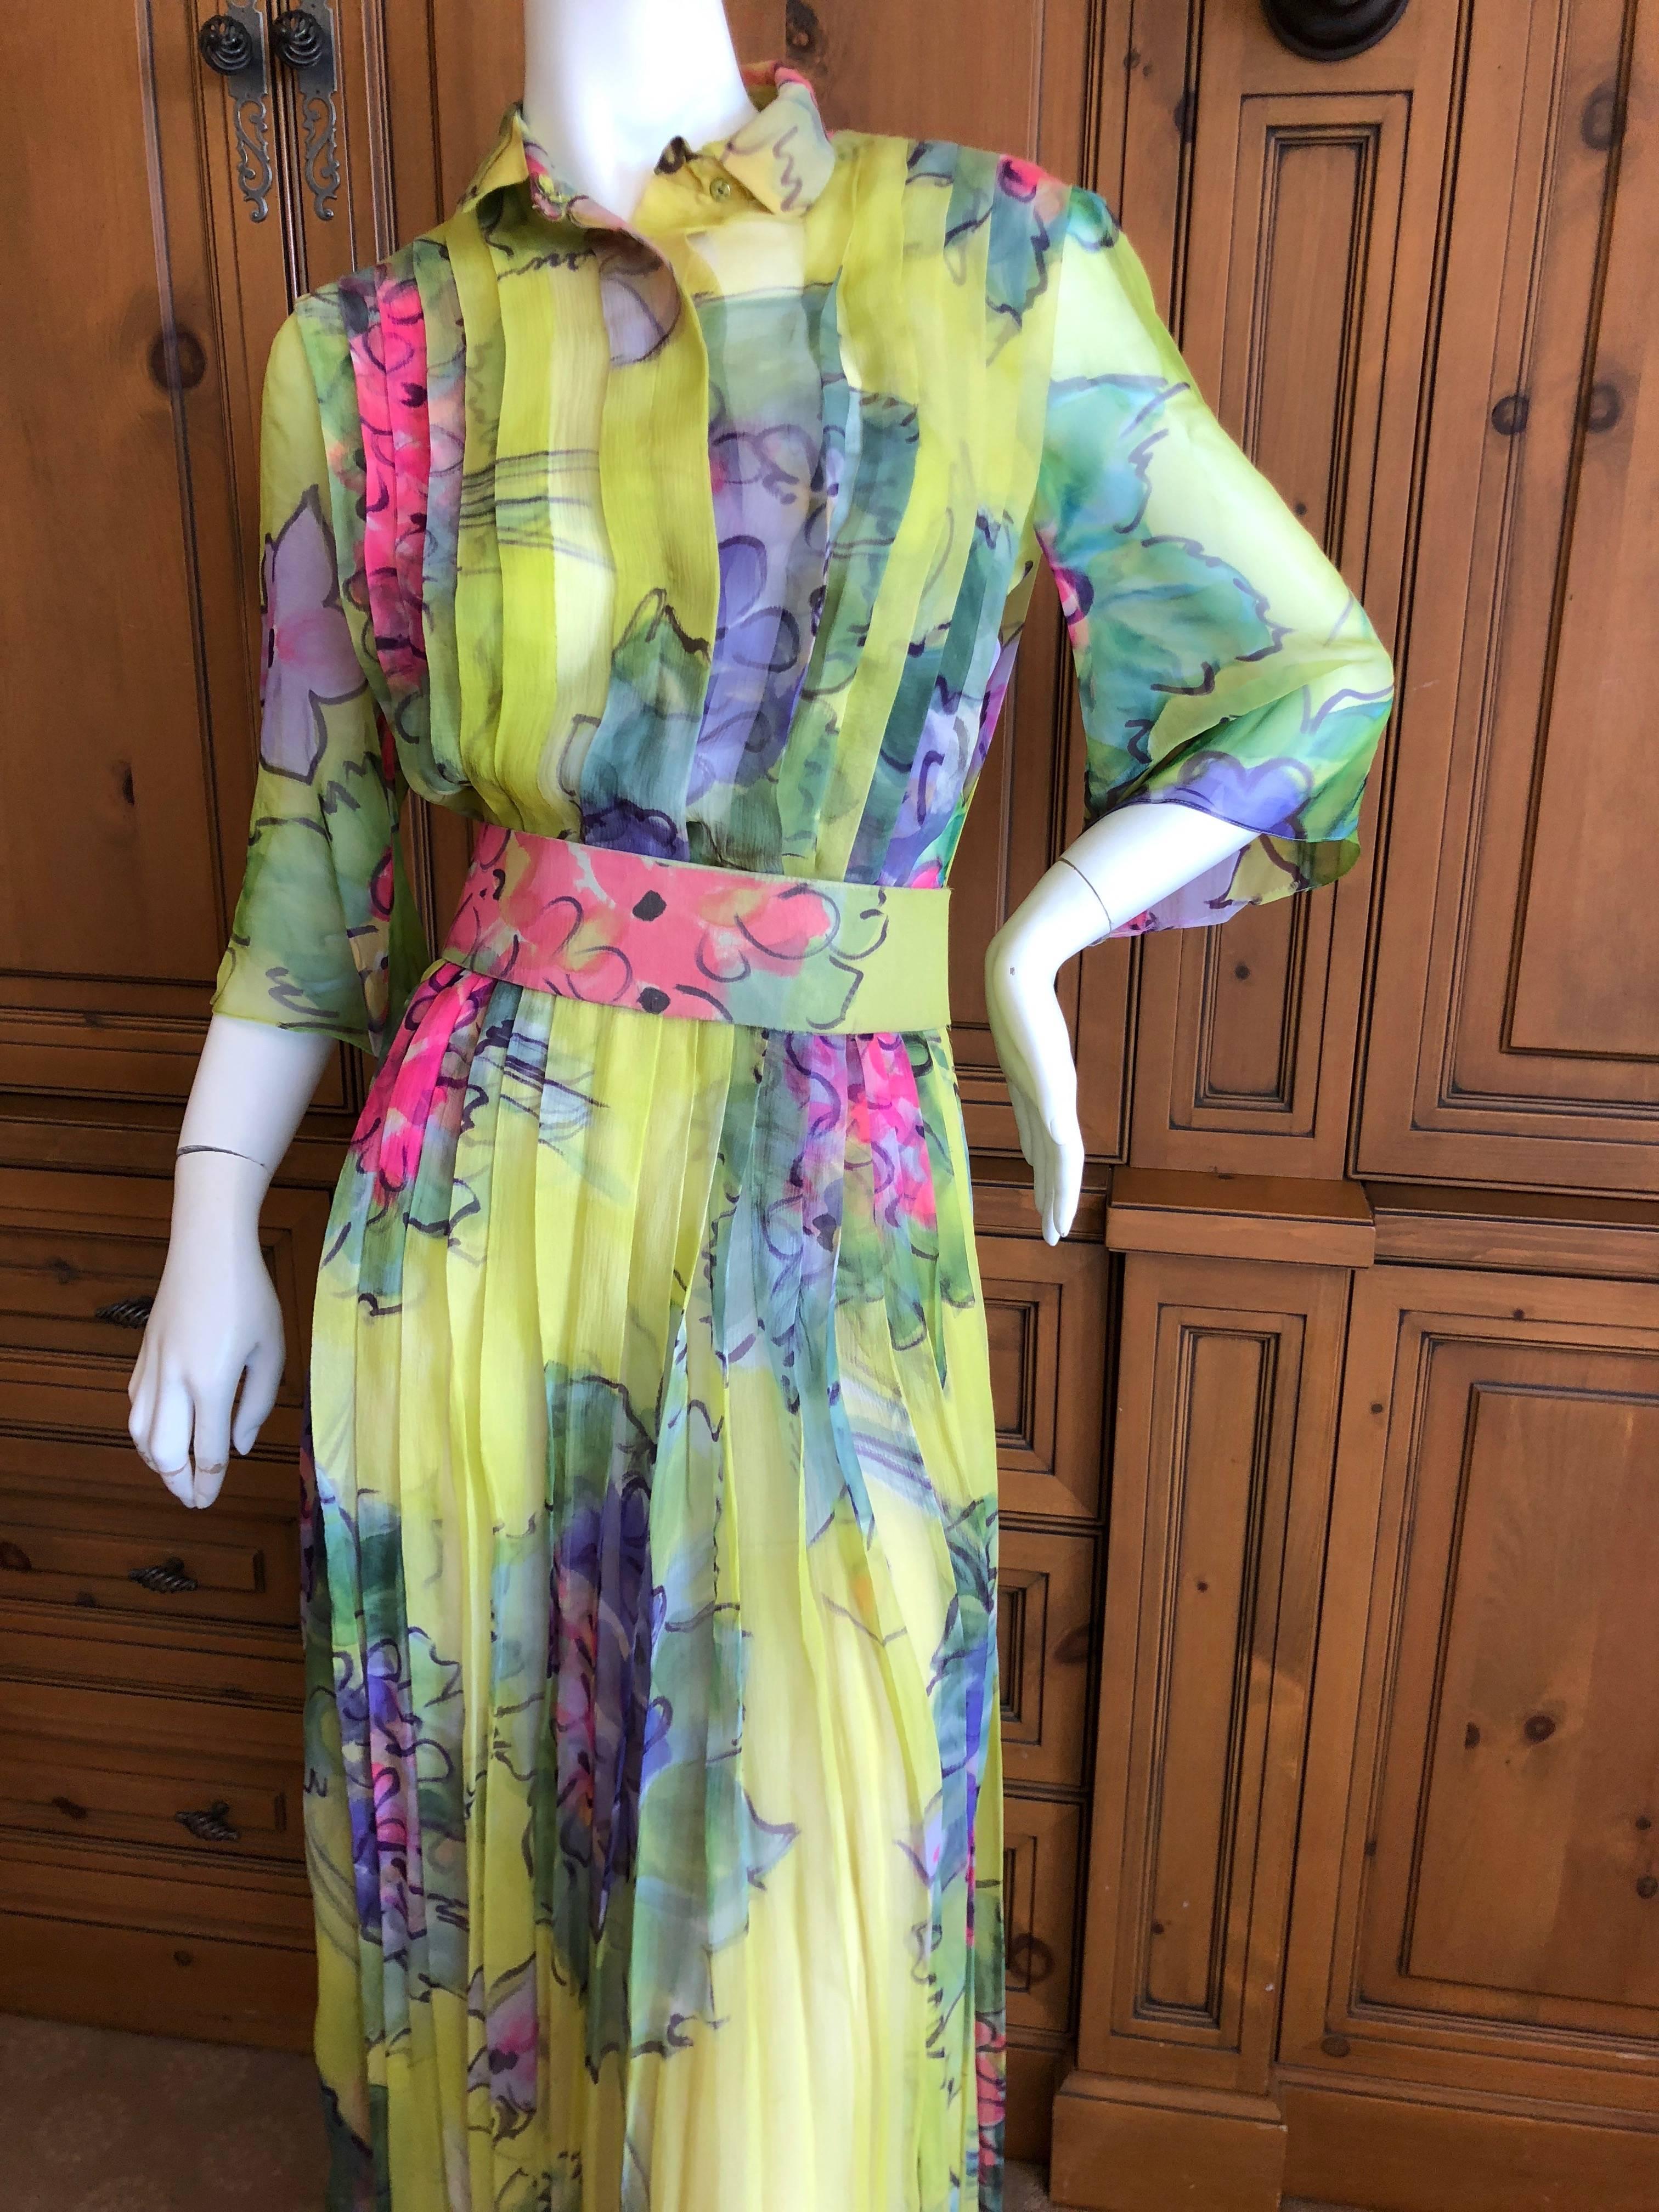 Cardinali Pleated Silk Chiffon Floral Evening Jumpsuit Dress with Belt.
Sadly this has damage on the back, see last two photos.

From the Archive of Marilyn Lewis, the creator of Cardinali
Cardinali was founded in Los Angeles in 1970, by Marilyn